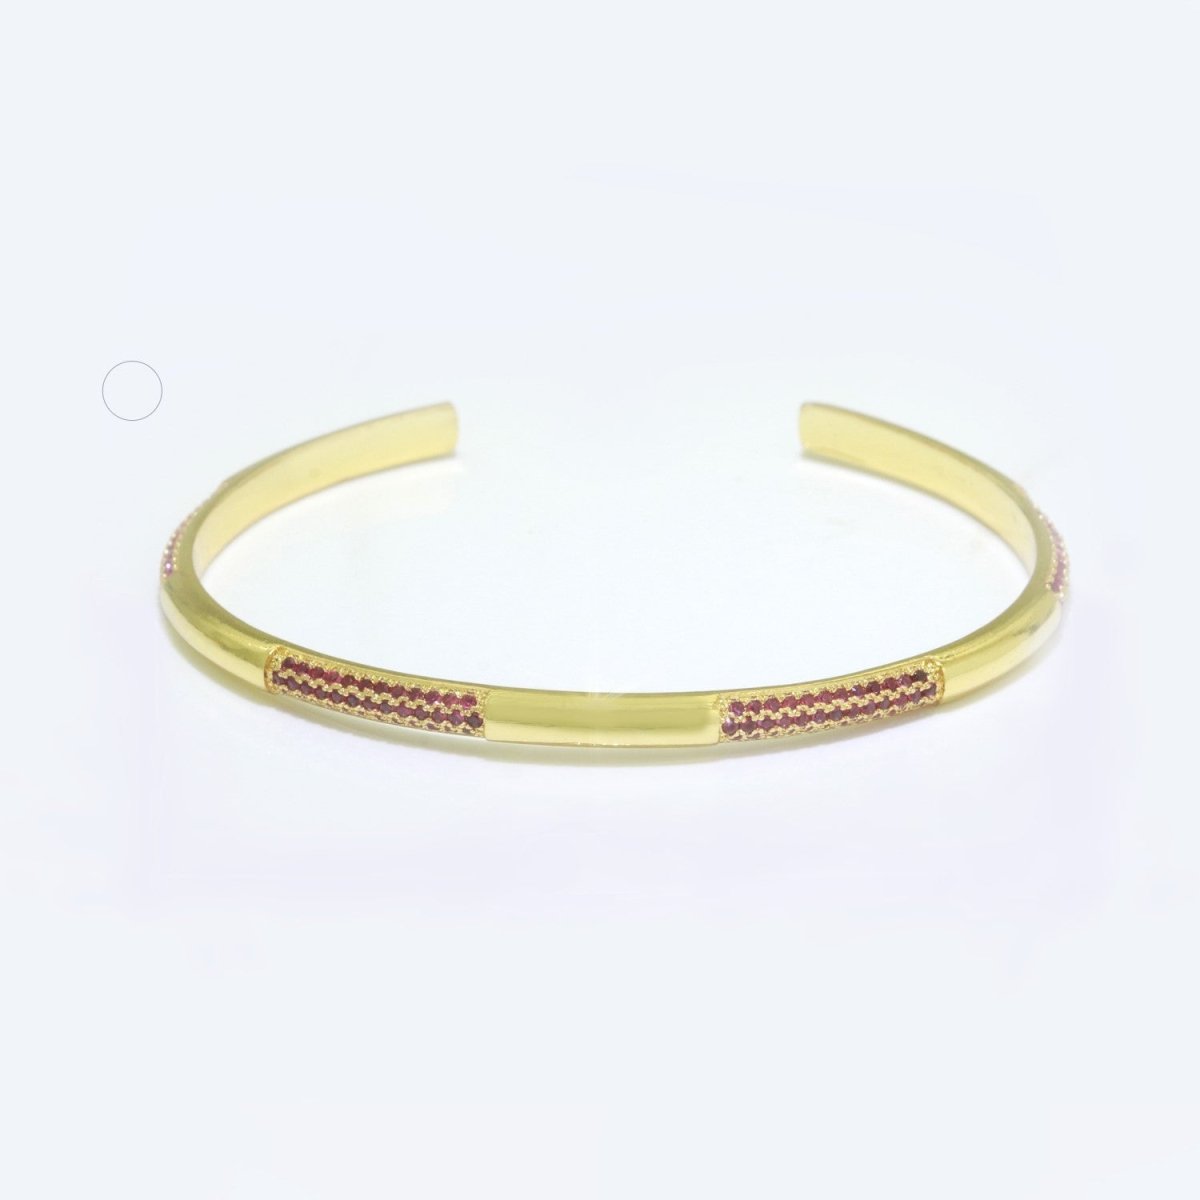 Dainty gold bracelet, thin gold cuff, Pink CZ minimalist jewelry, layering jewelry, gift for her, delicate Bangle bracelet | WA-184 Clearance Pricing - DLUXCA